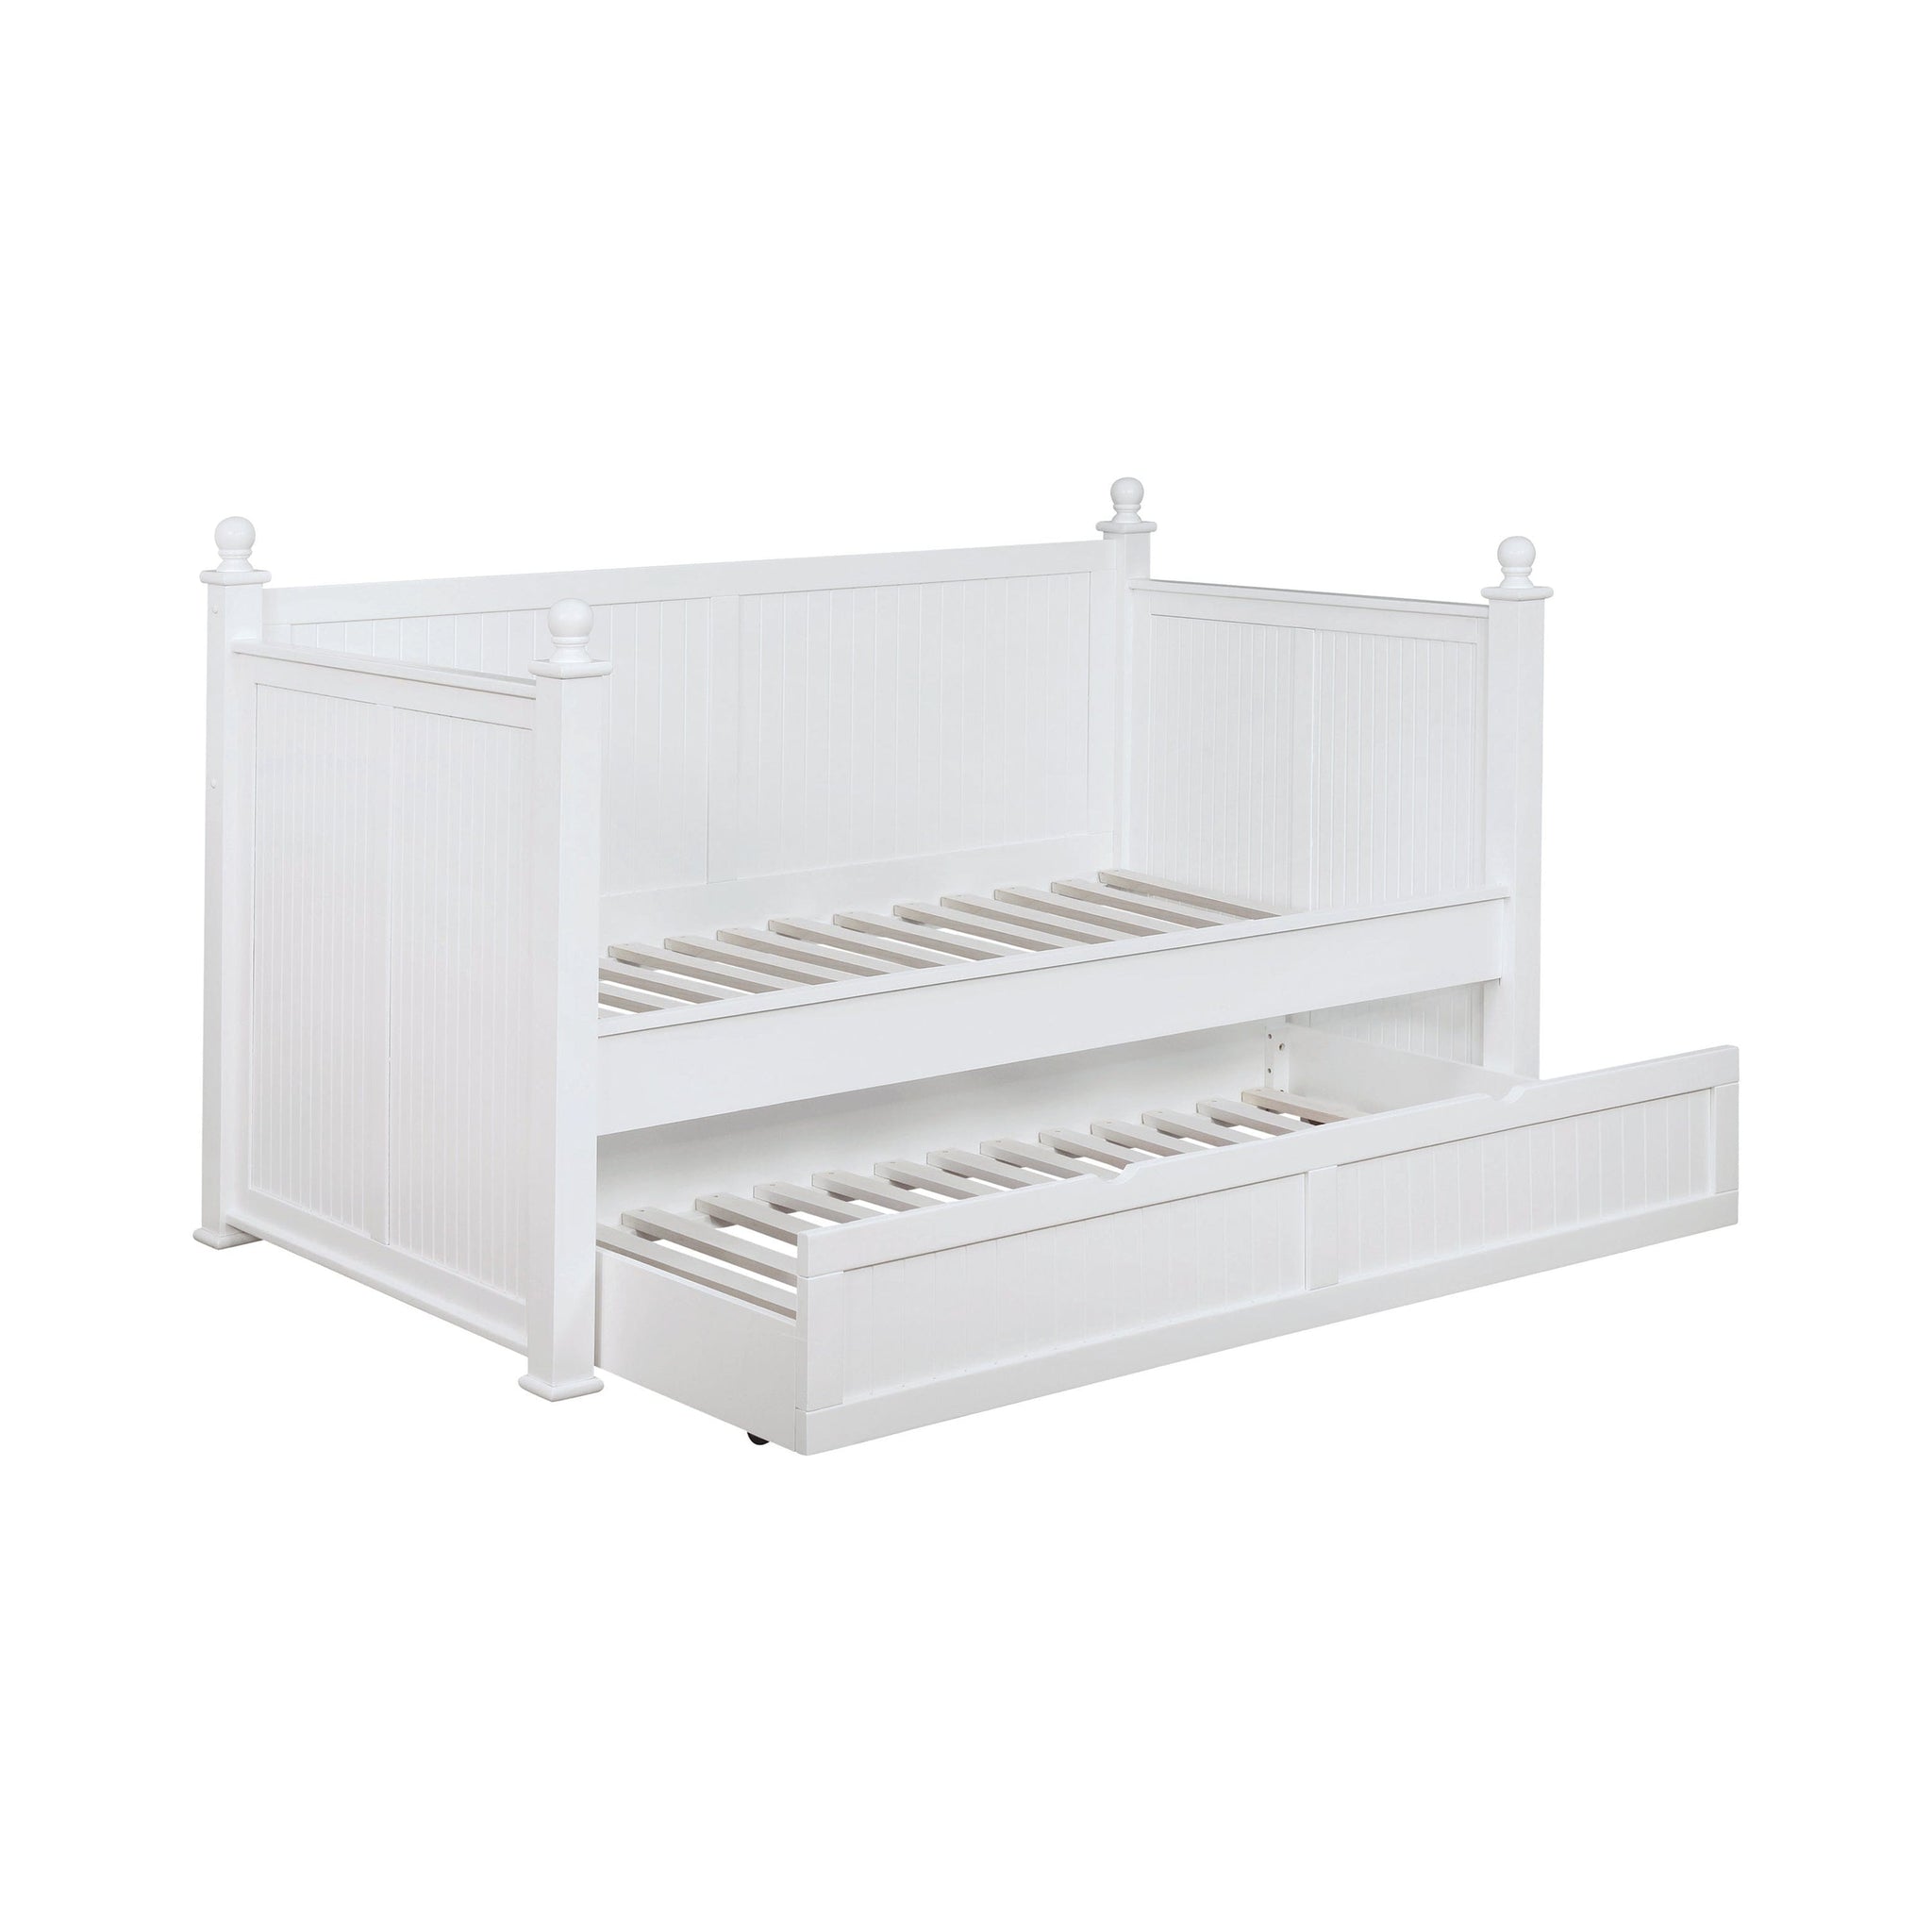 Twin Daybed With Trundle White - 300026